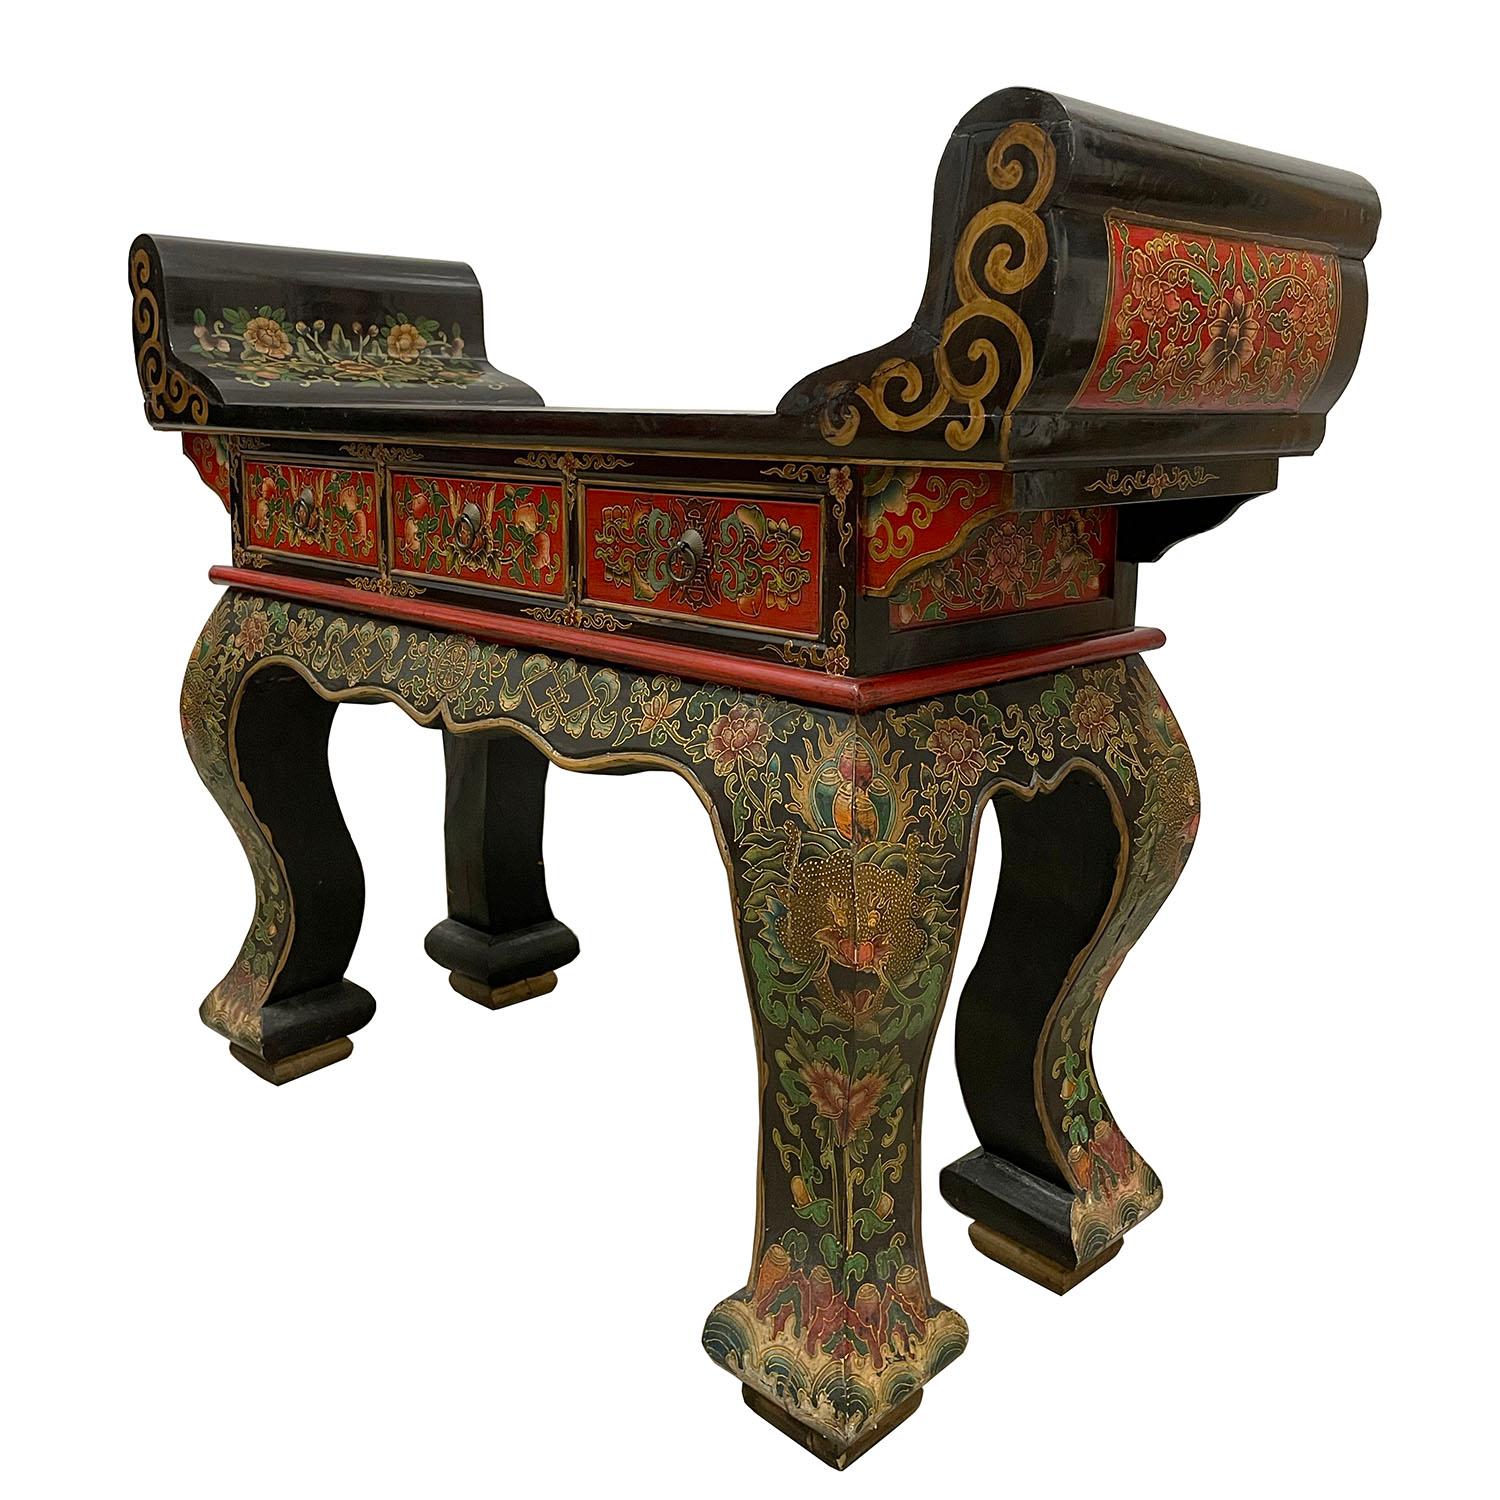 Size: 32in H x53in W x 18in D
Drawer: 3 1/4in H x 10in W x 13in D
Origin: Tibet
Circa: 1950's
Material: Wood
Condition: Solid wood construction, very heavy and sturdy, hand painted. Minor blemishes due to age
Look at this Vintage Altar table